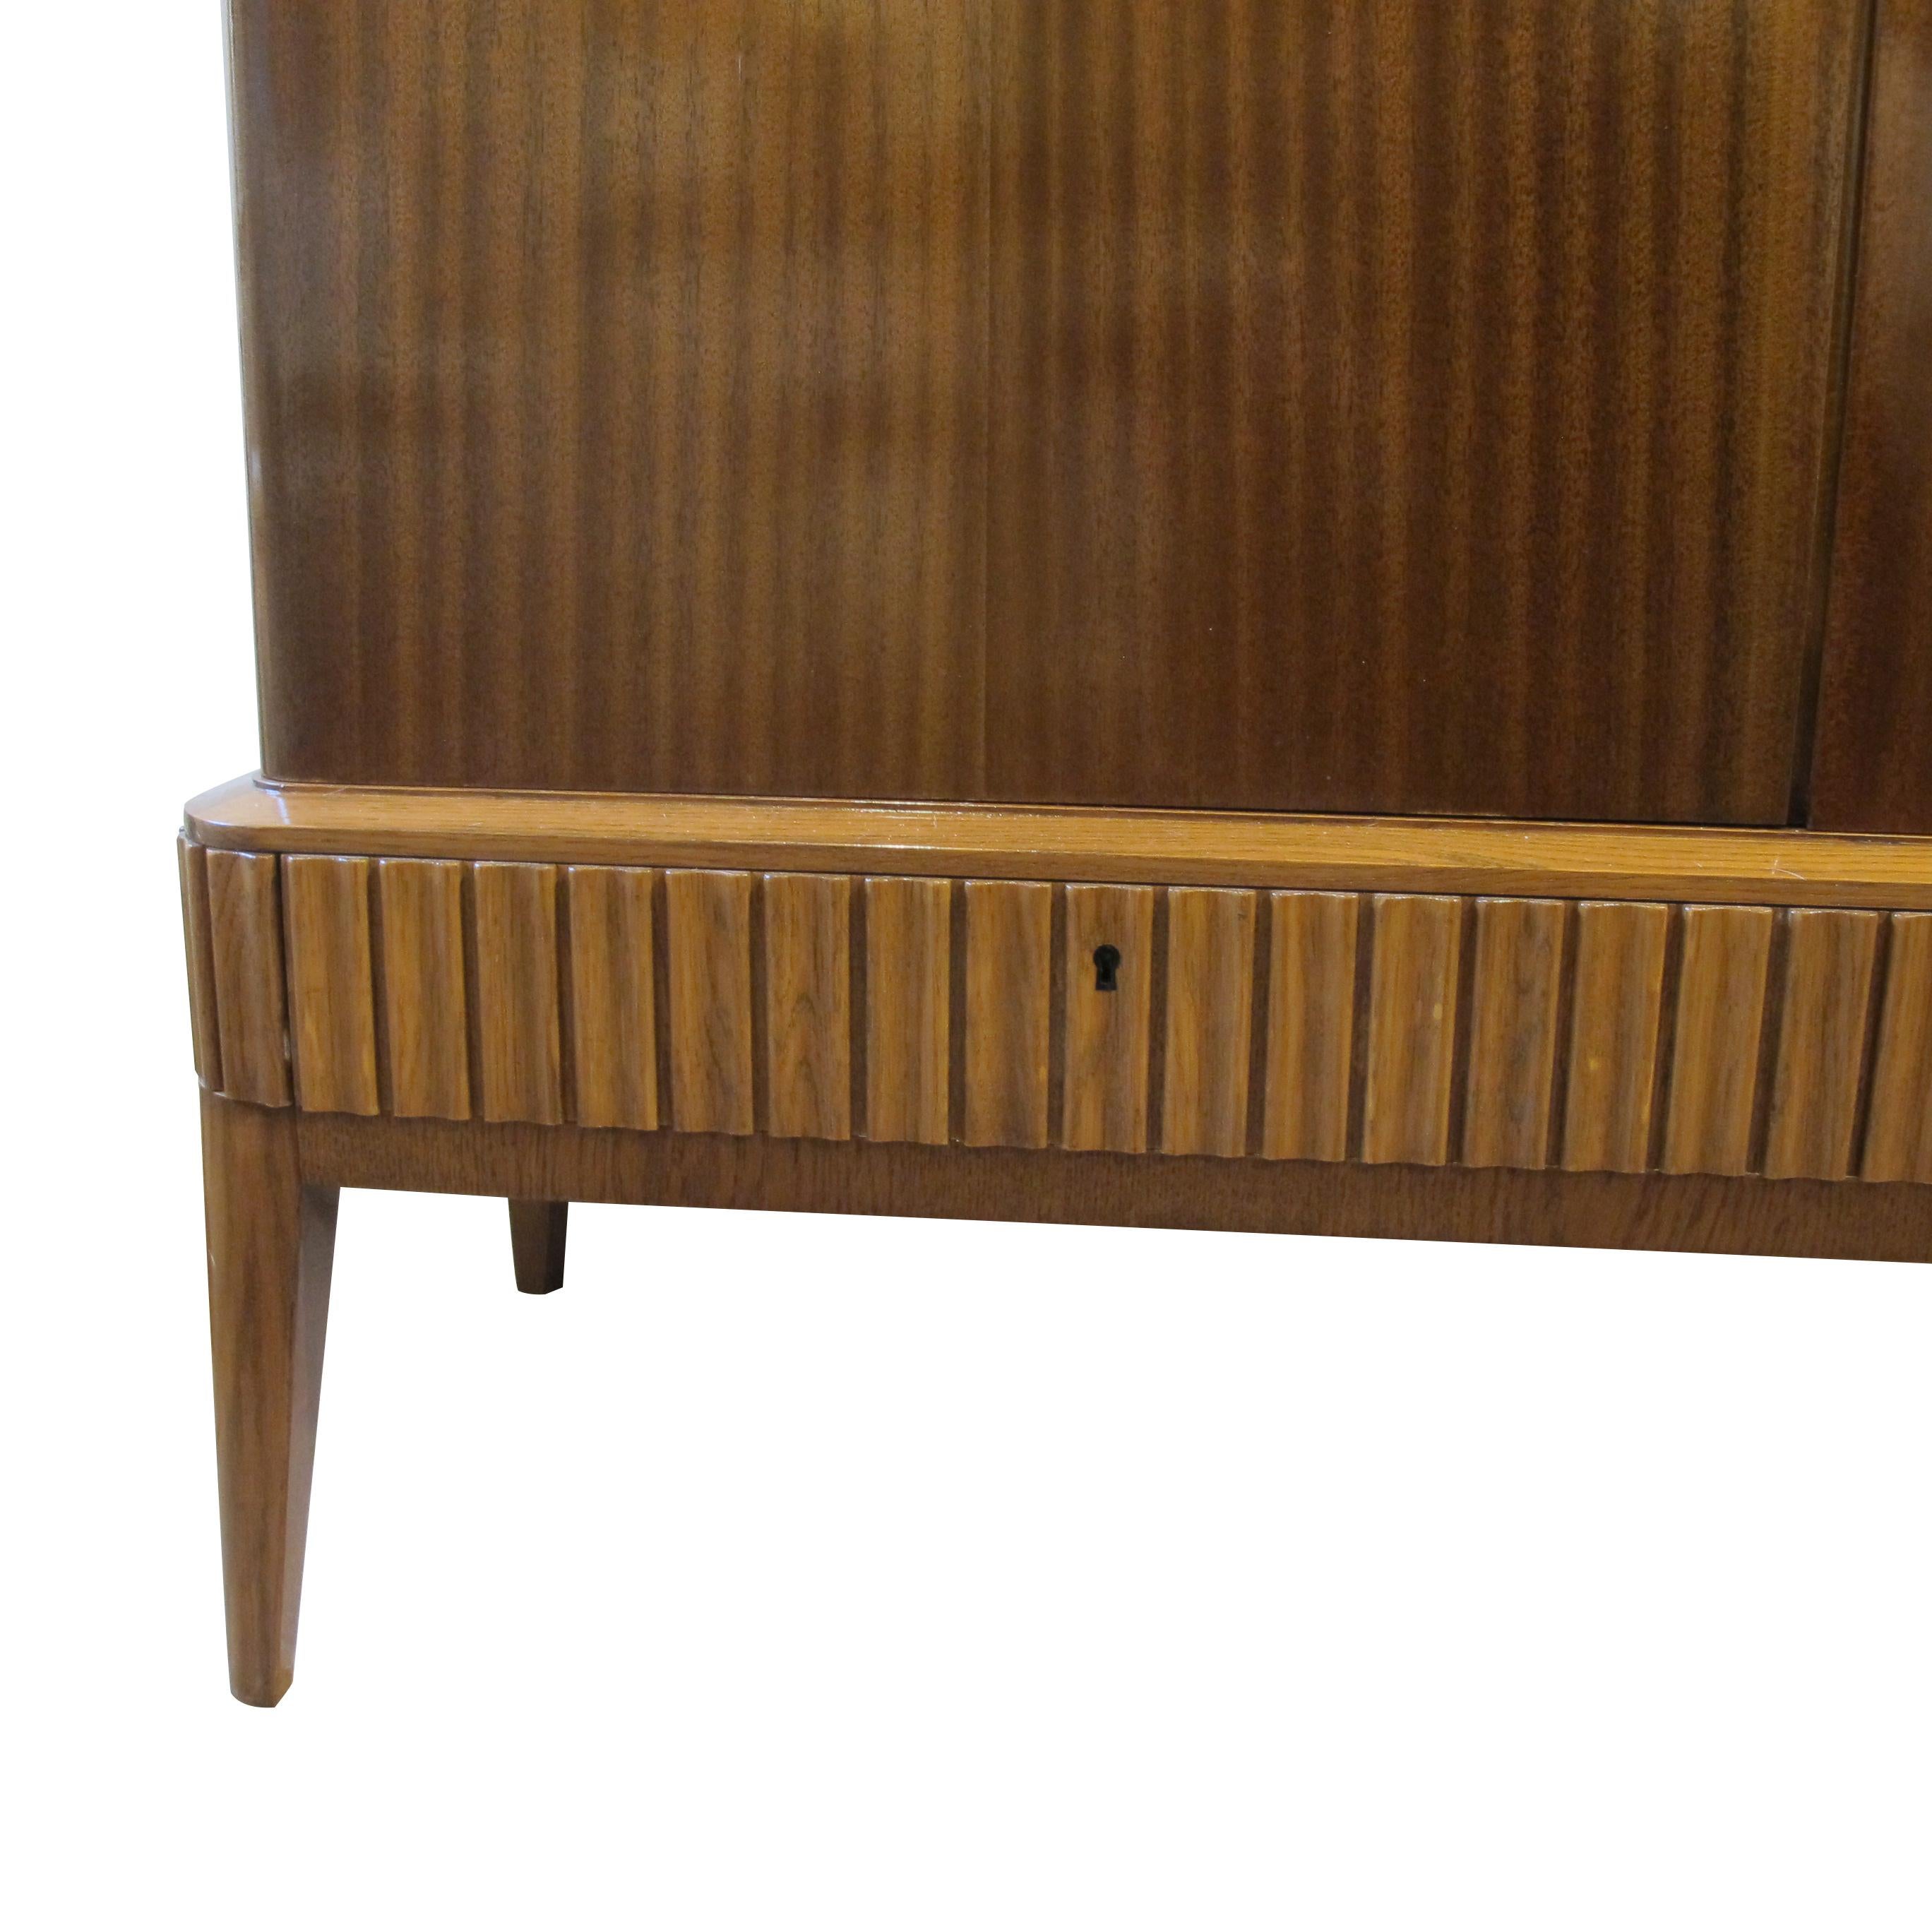 Mid-20th Century 1940s Tall Swedish Sideboard/Cabinet by Blomstermåla Möbelfabrik For Sale